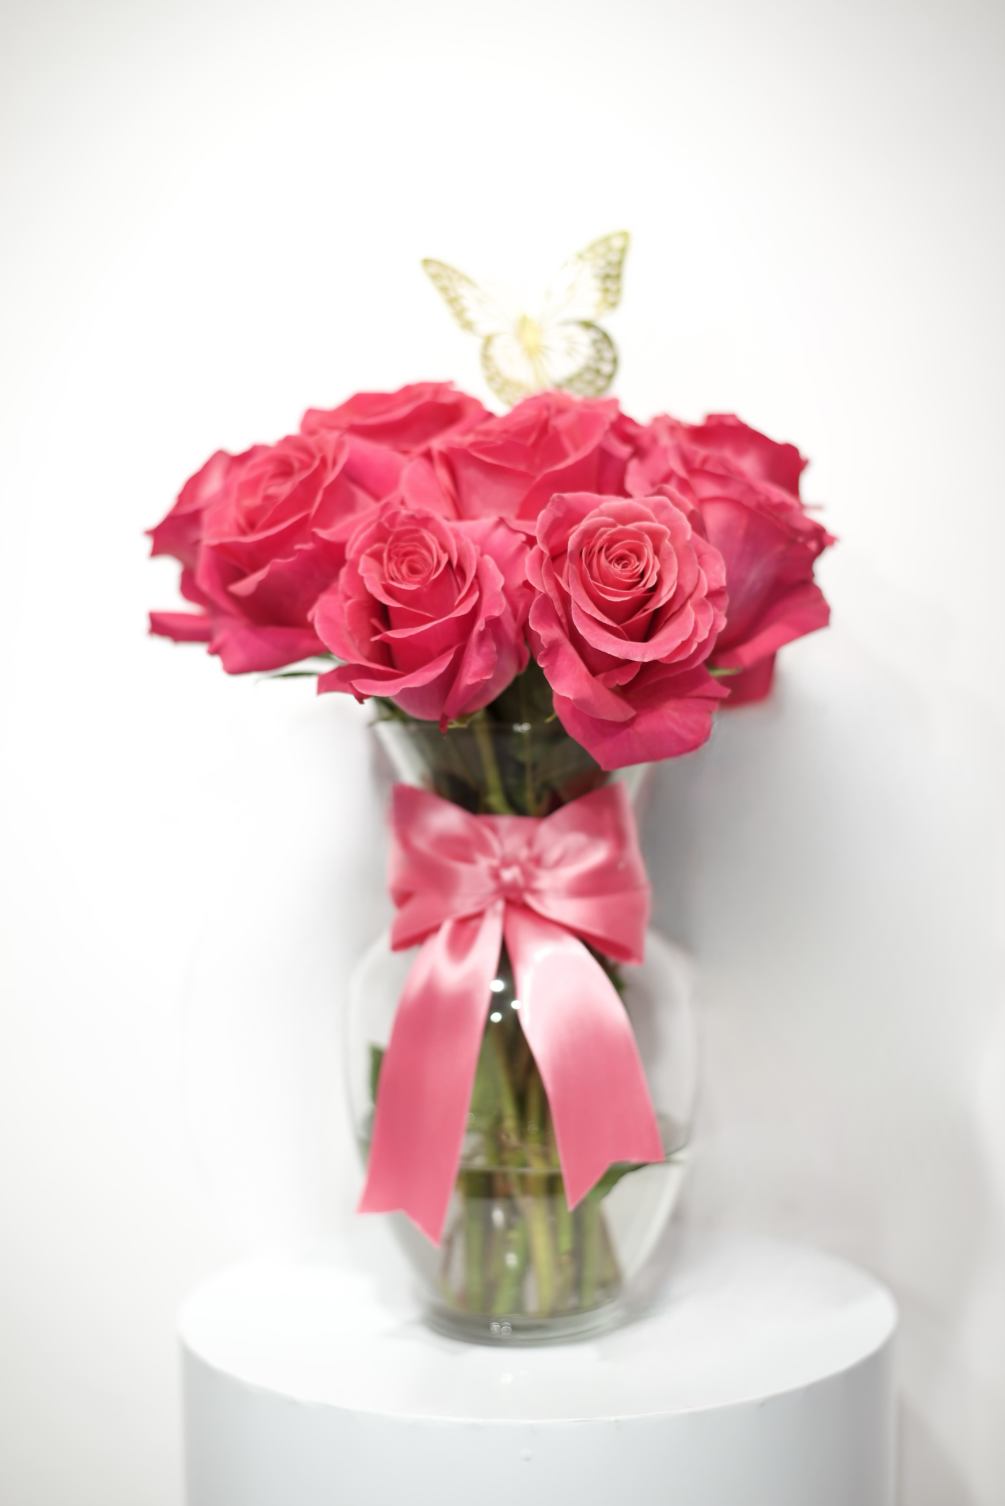 Our pink arrangement has been create to elevate your occasion 1 dozen